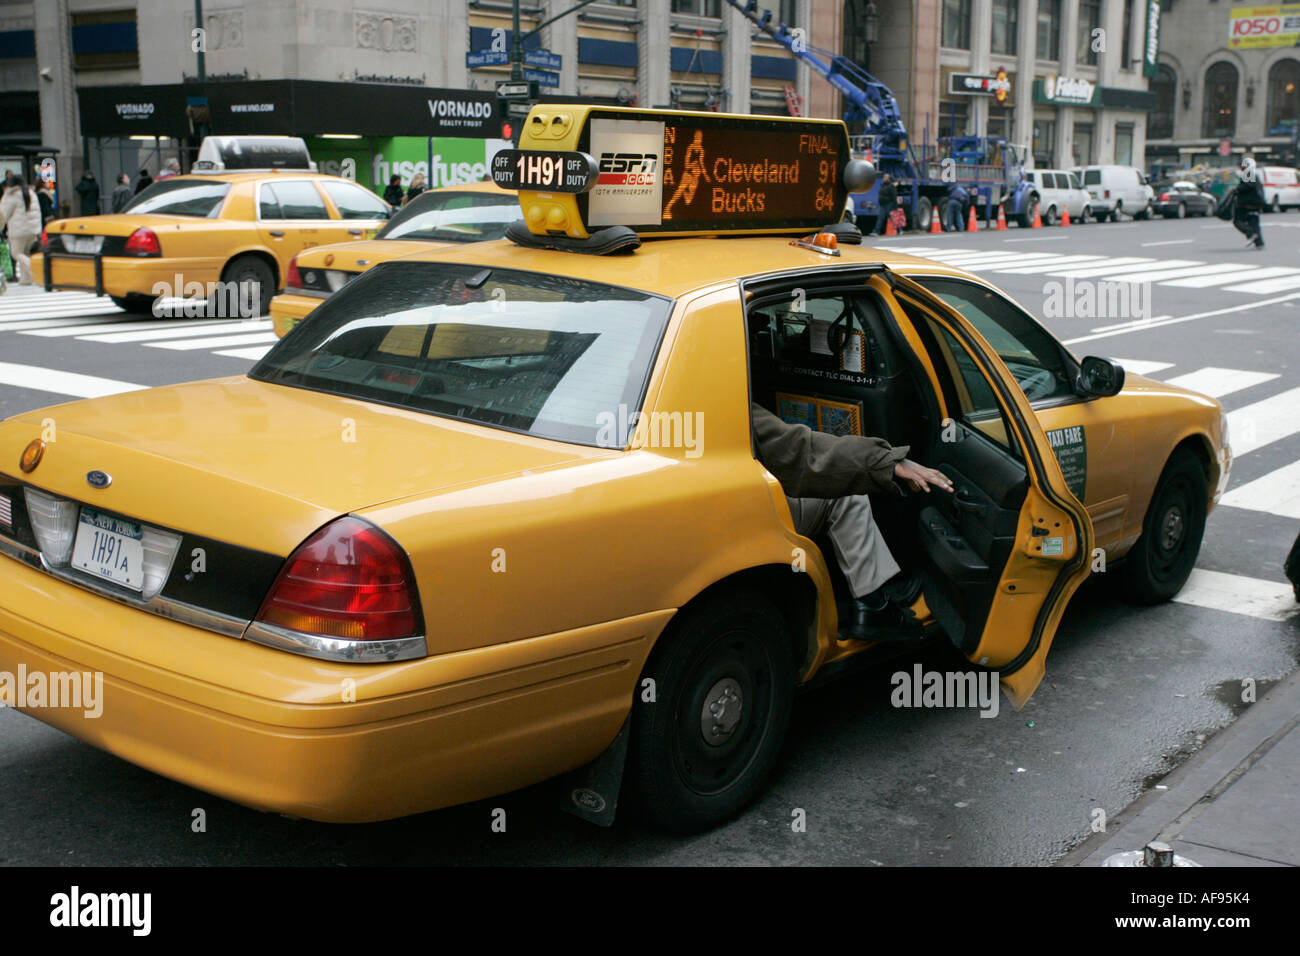 white caucasian passenger closes rear door of yellow cab on taxi rank at crosswalk on 7th Avenue outside Madison Square Garden Stock Photo